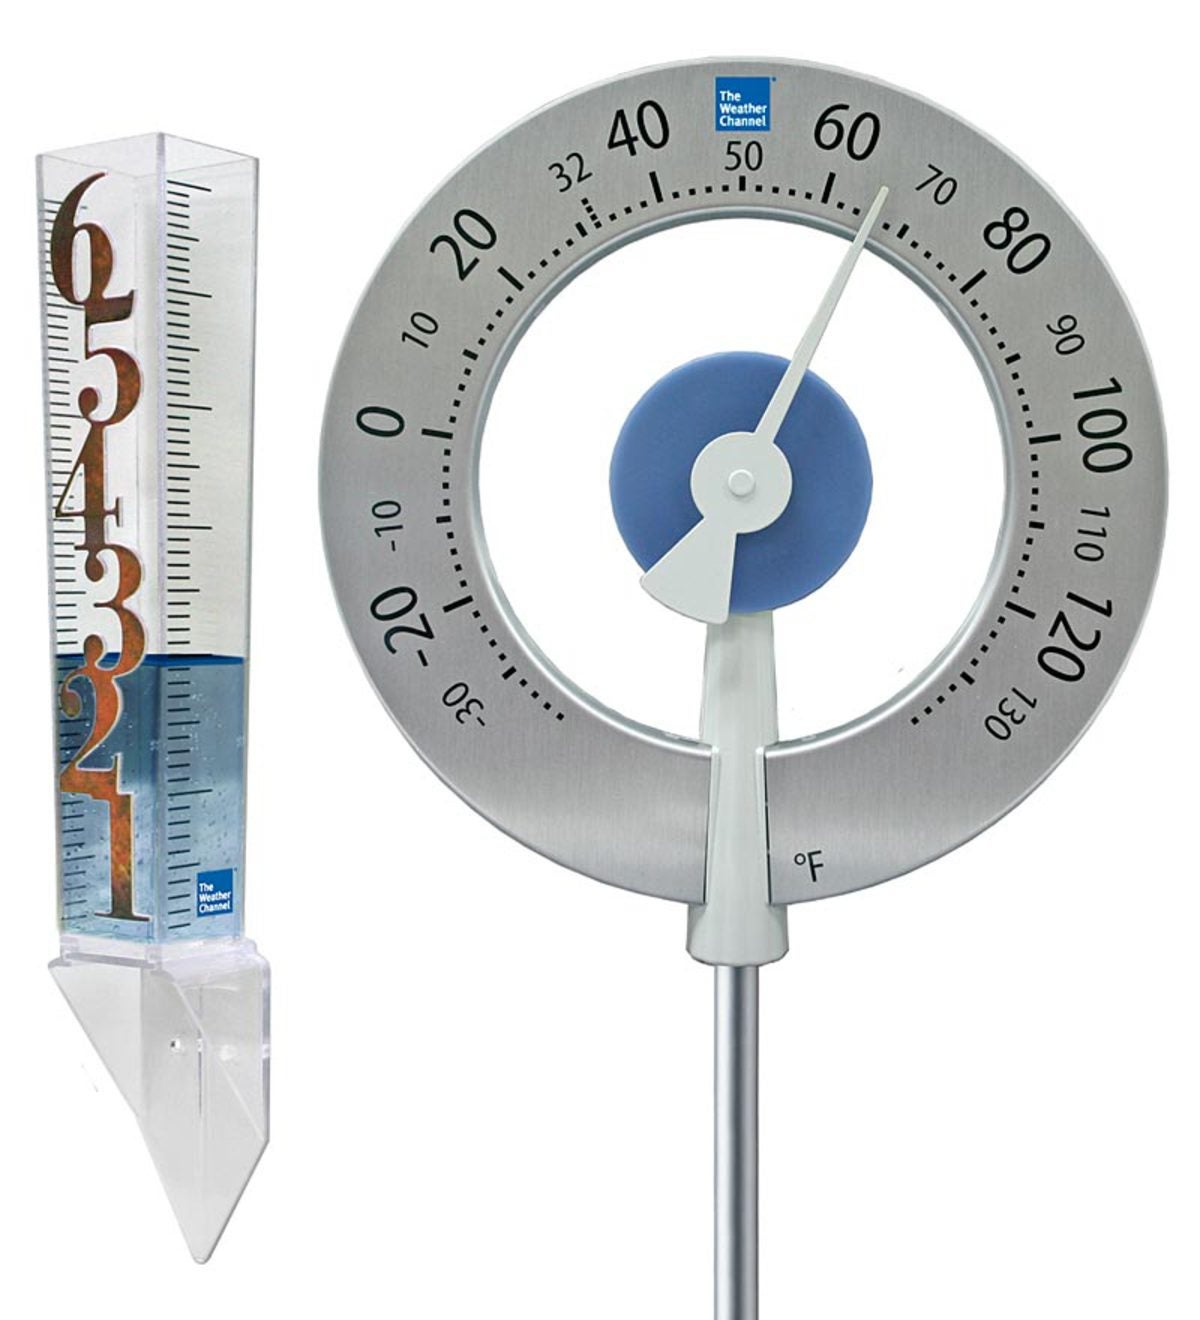 The Weather Channel® Analog Garden Thermometer Stake And Patina Rain Gauge  Set by La Crosse Technology®